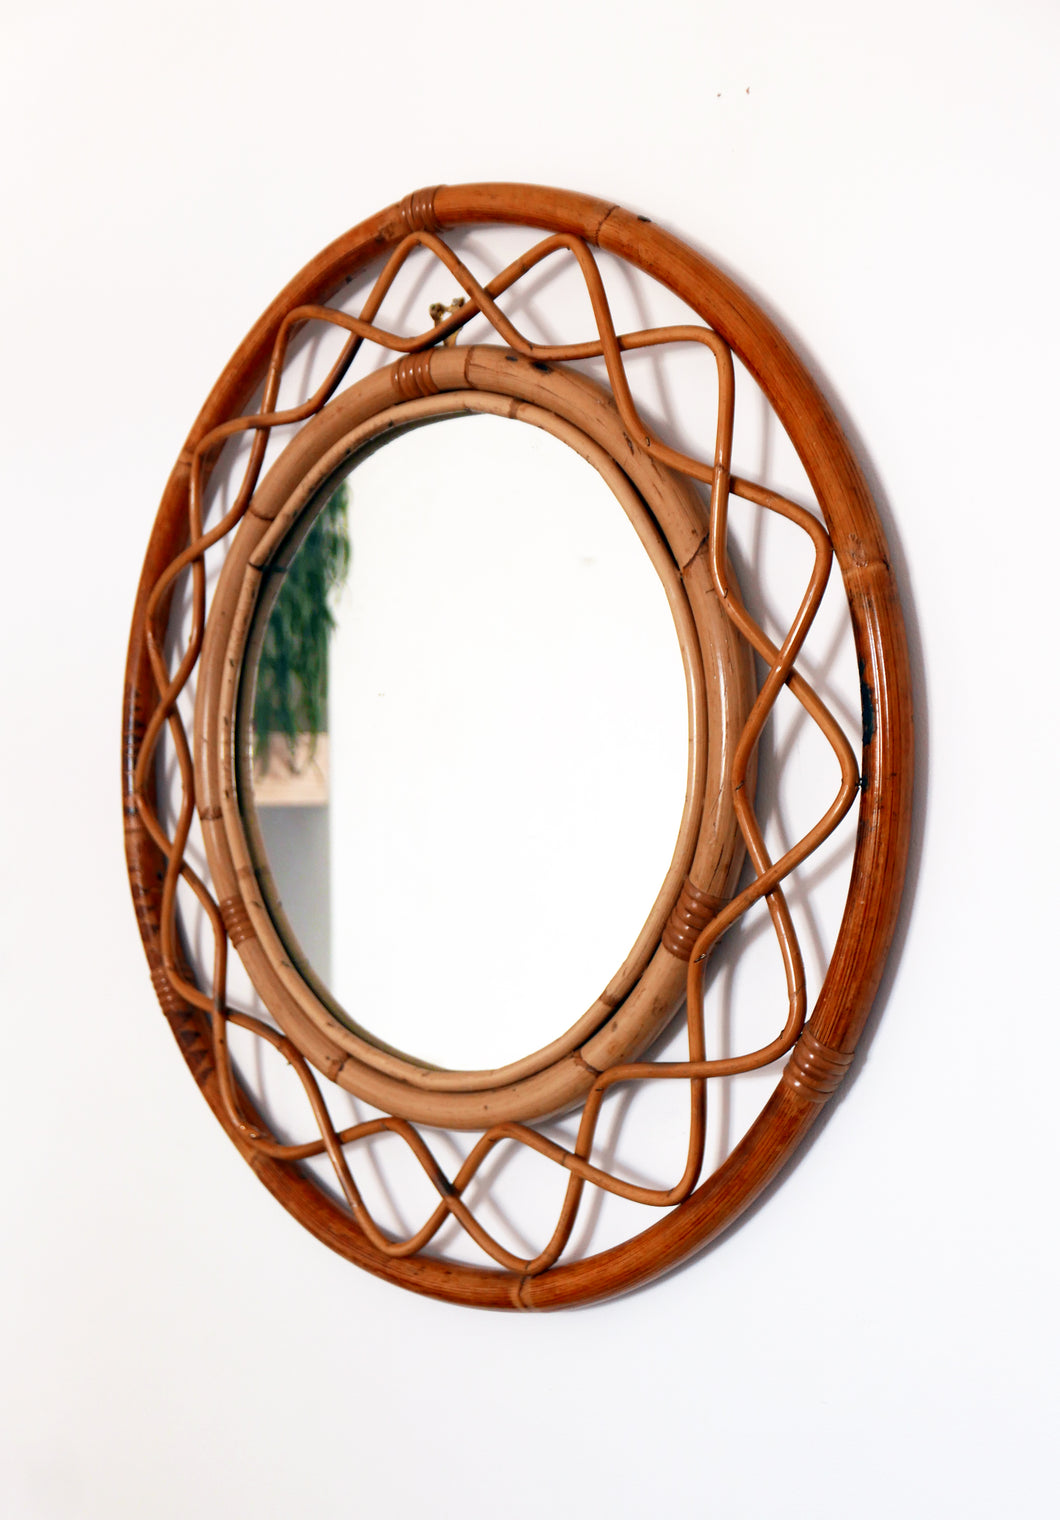 Vintage Bamboo And Cane Round Mirror